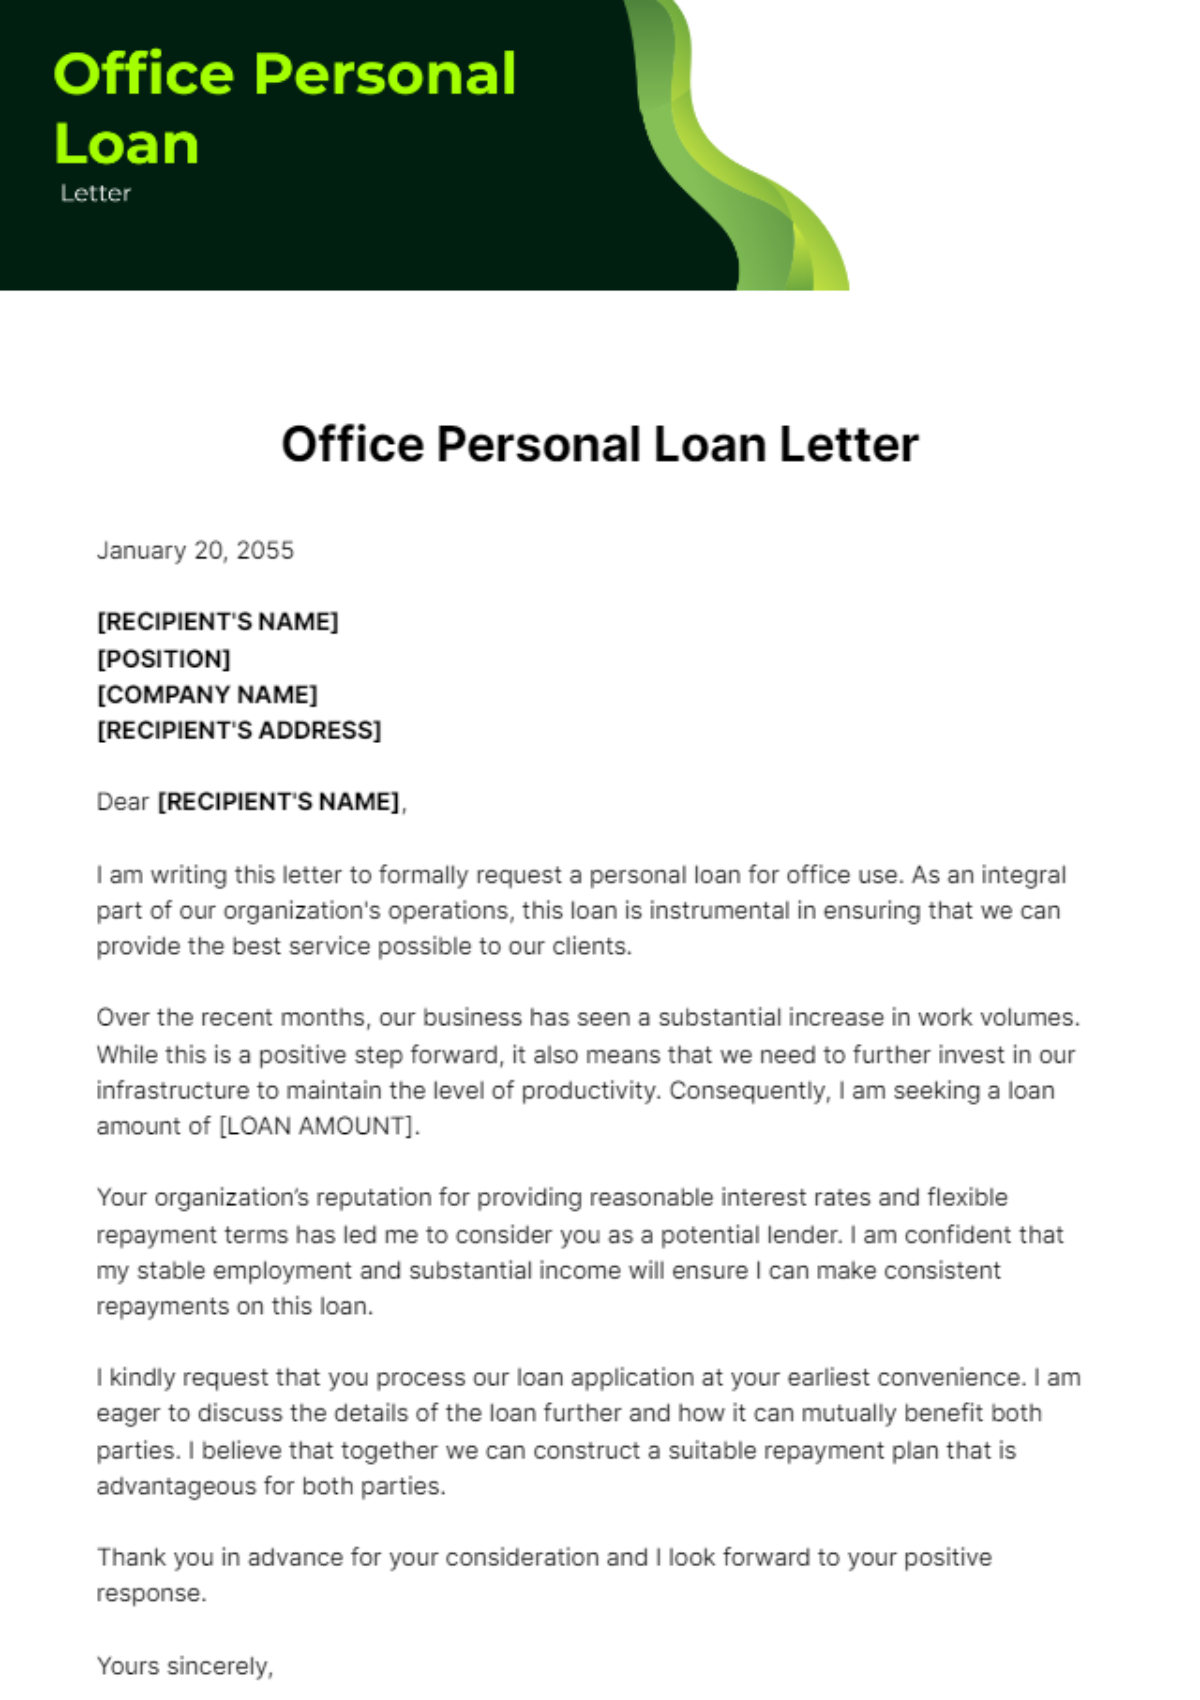 Free Office Personal Loan Letter Template